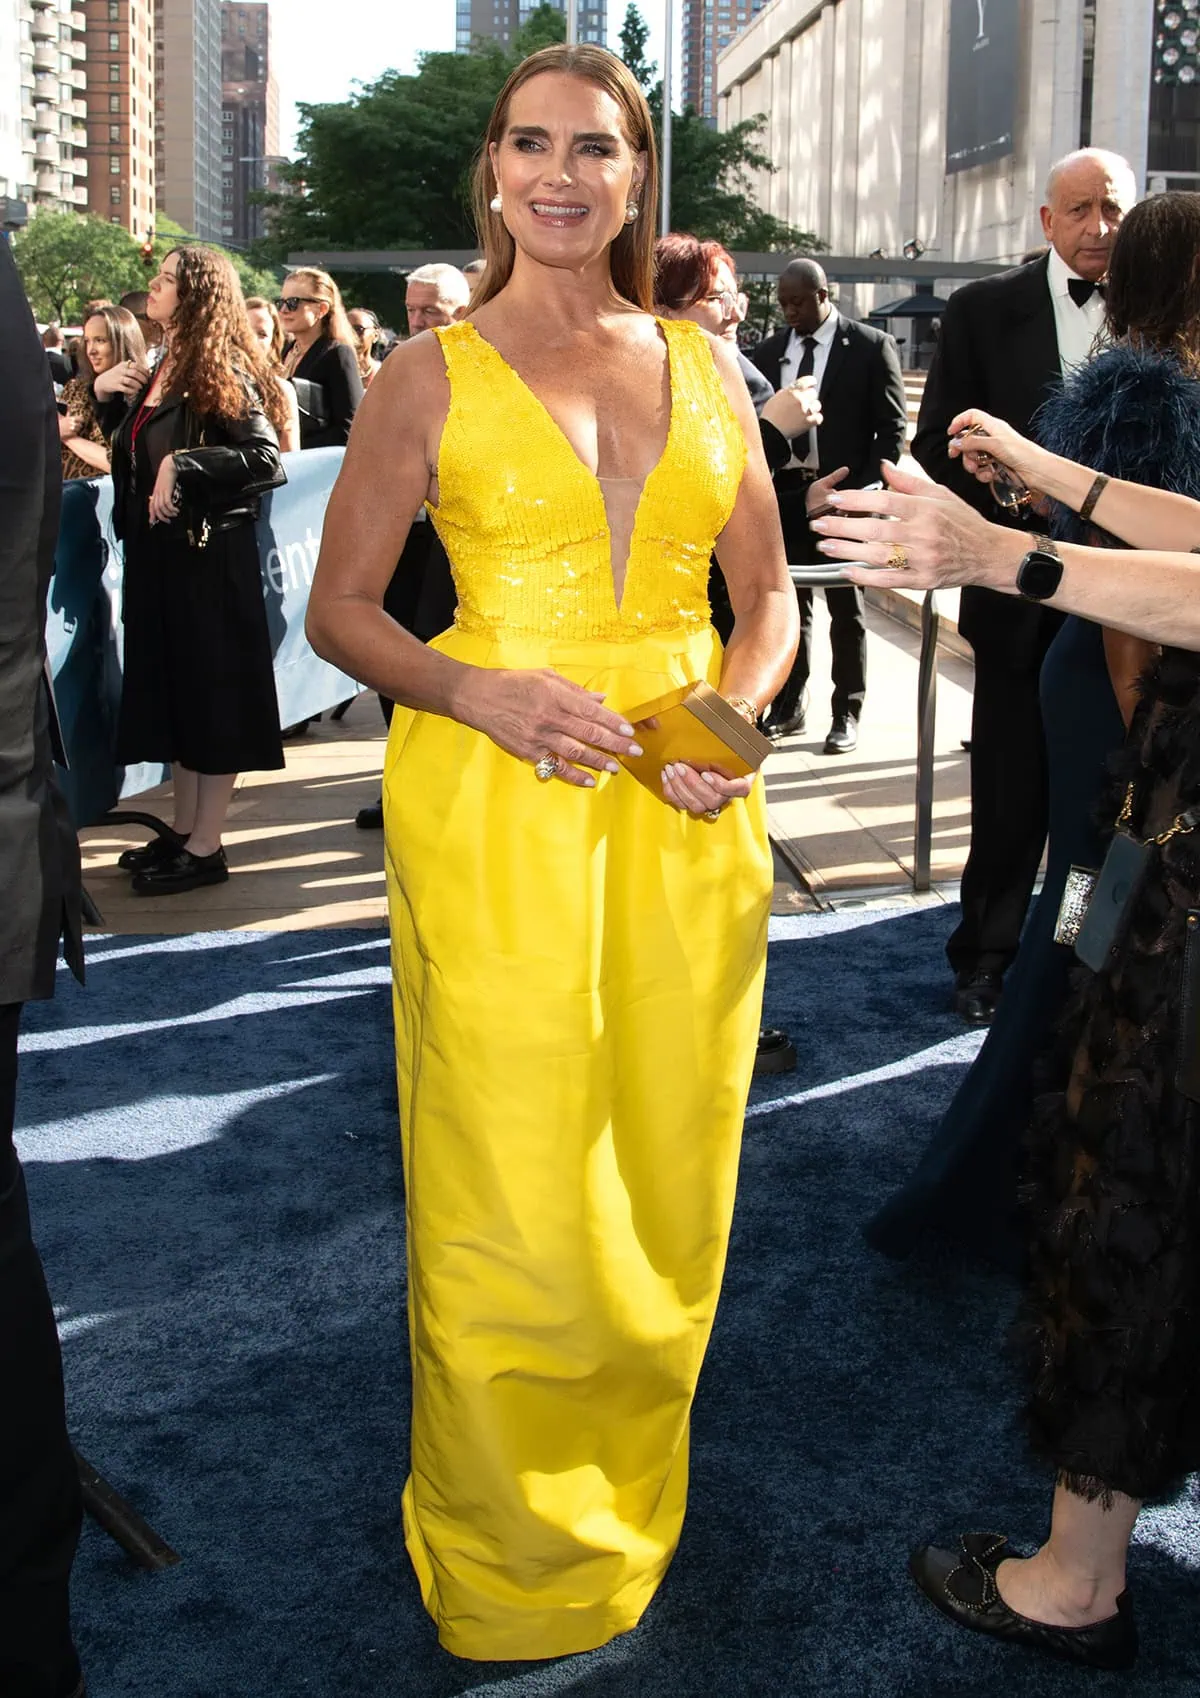 Brooke Shields looks stunning in her yellow sequin Monique Lhuillier gown with a plunging neckline, a bustle, and a tapered skirt